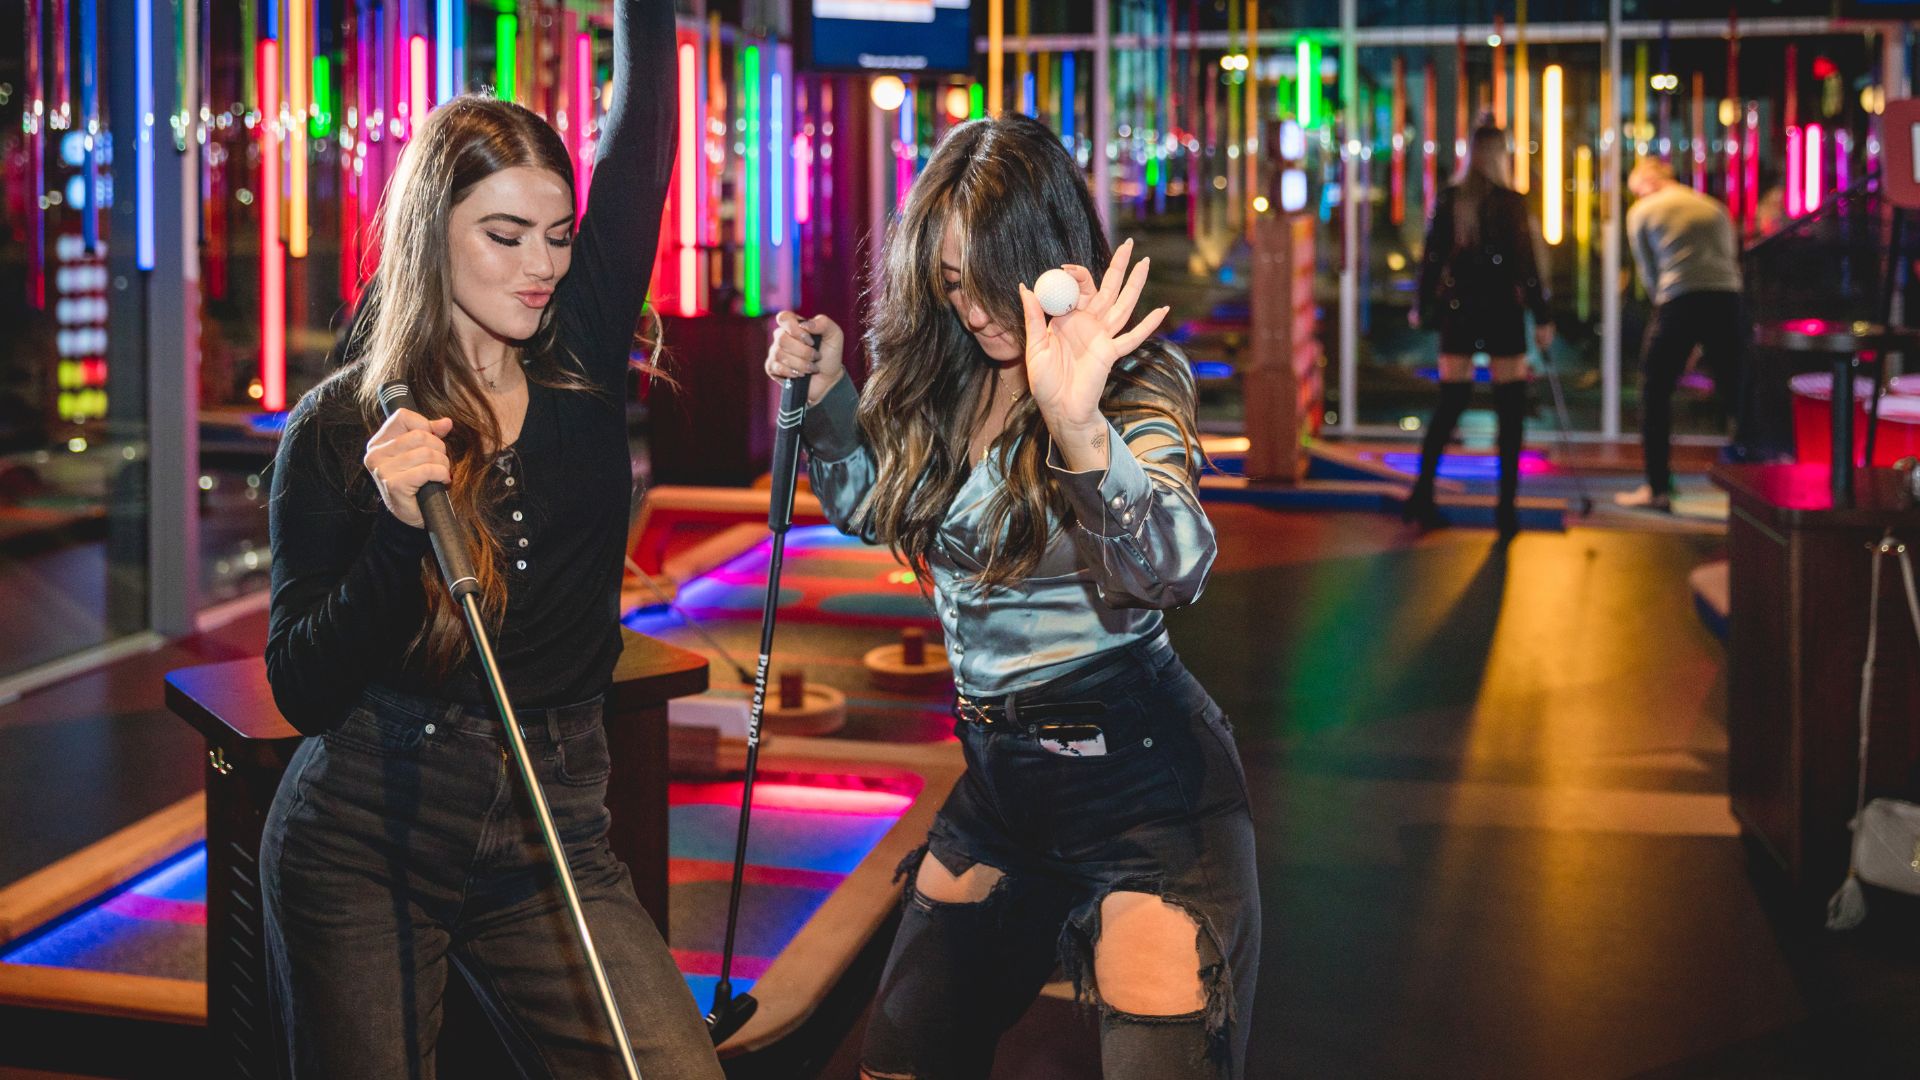 Two girls dance at Puttshack, a tech-infused mini golf course with colorful nightlife vibes.